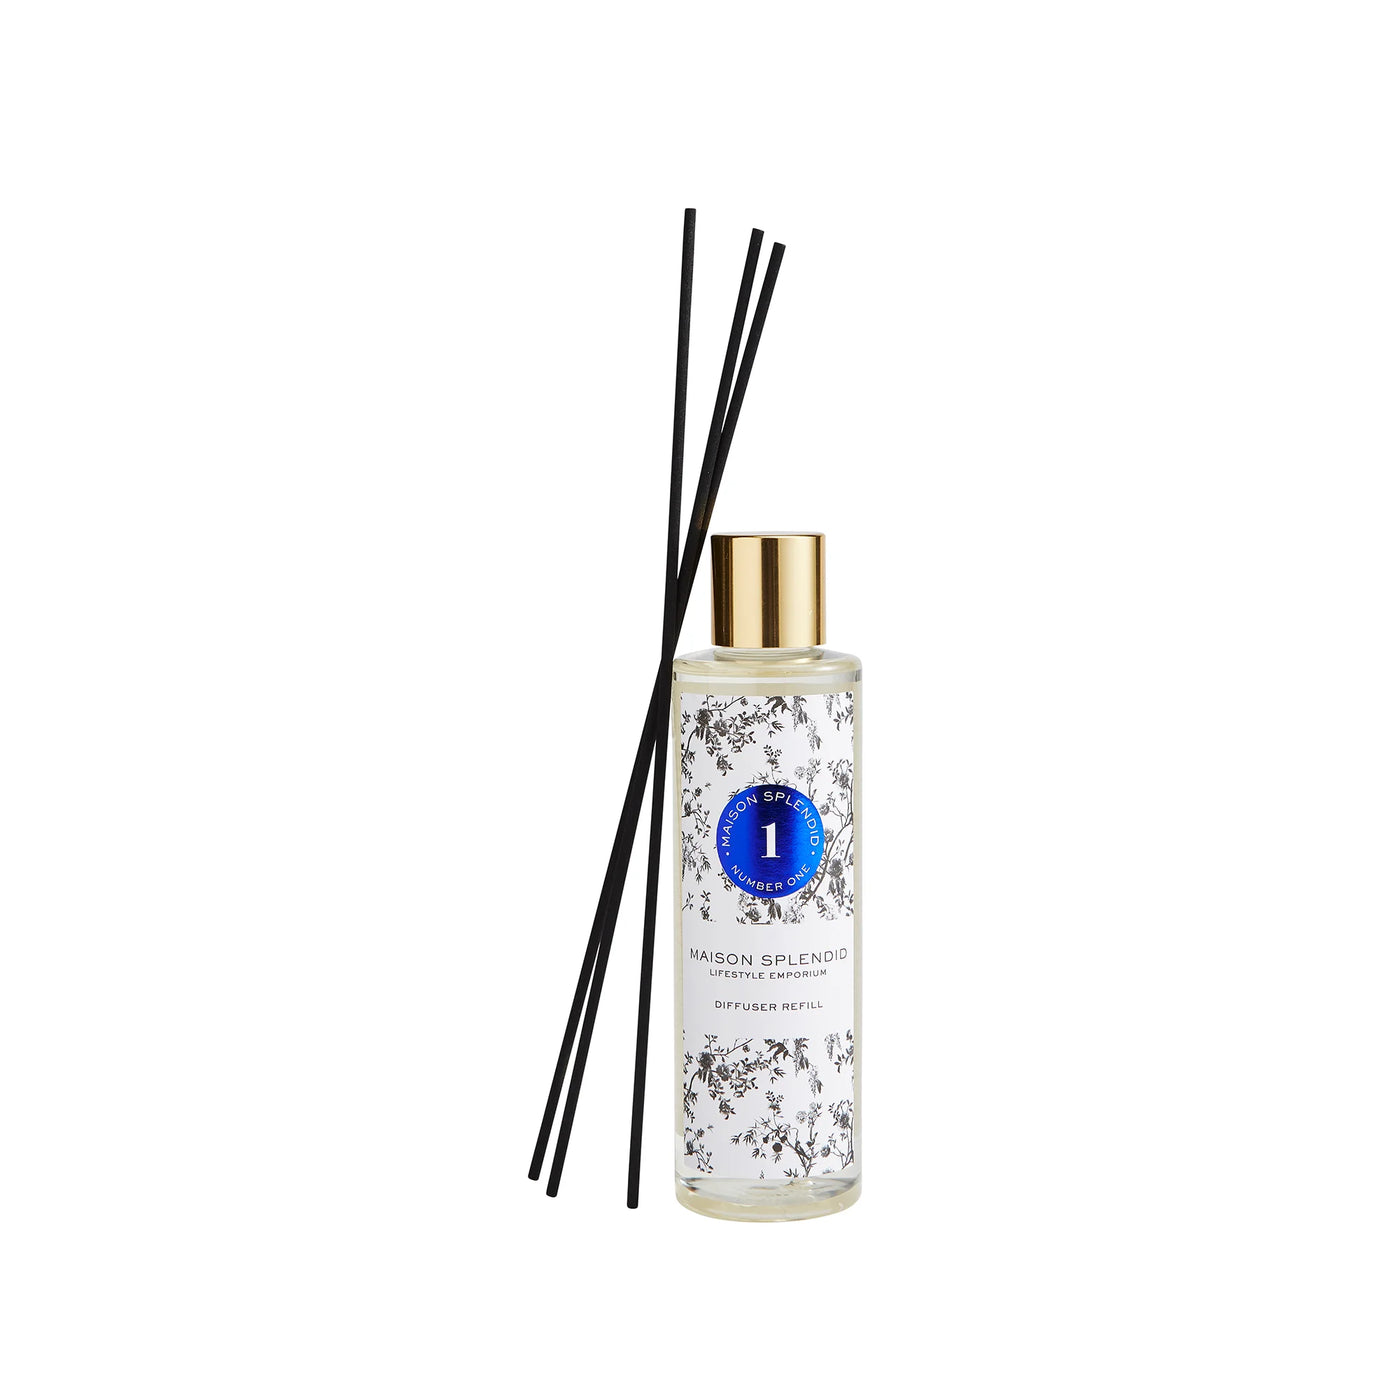 Maison Splendid diffuser refill scent number one